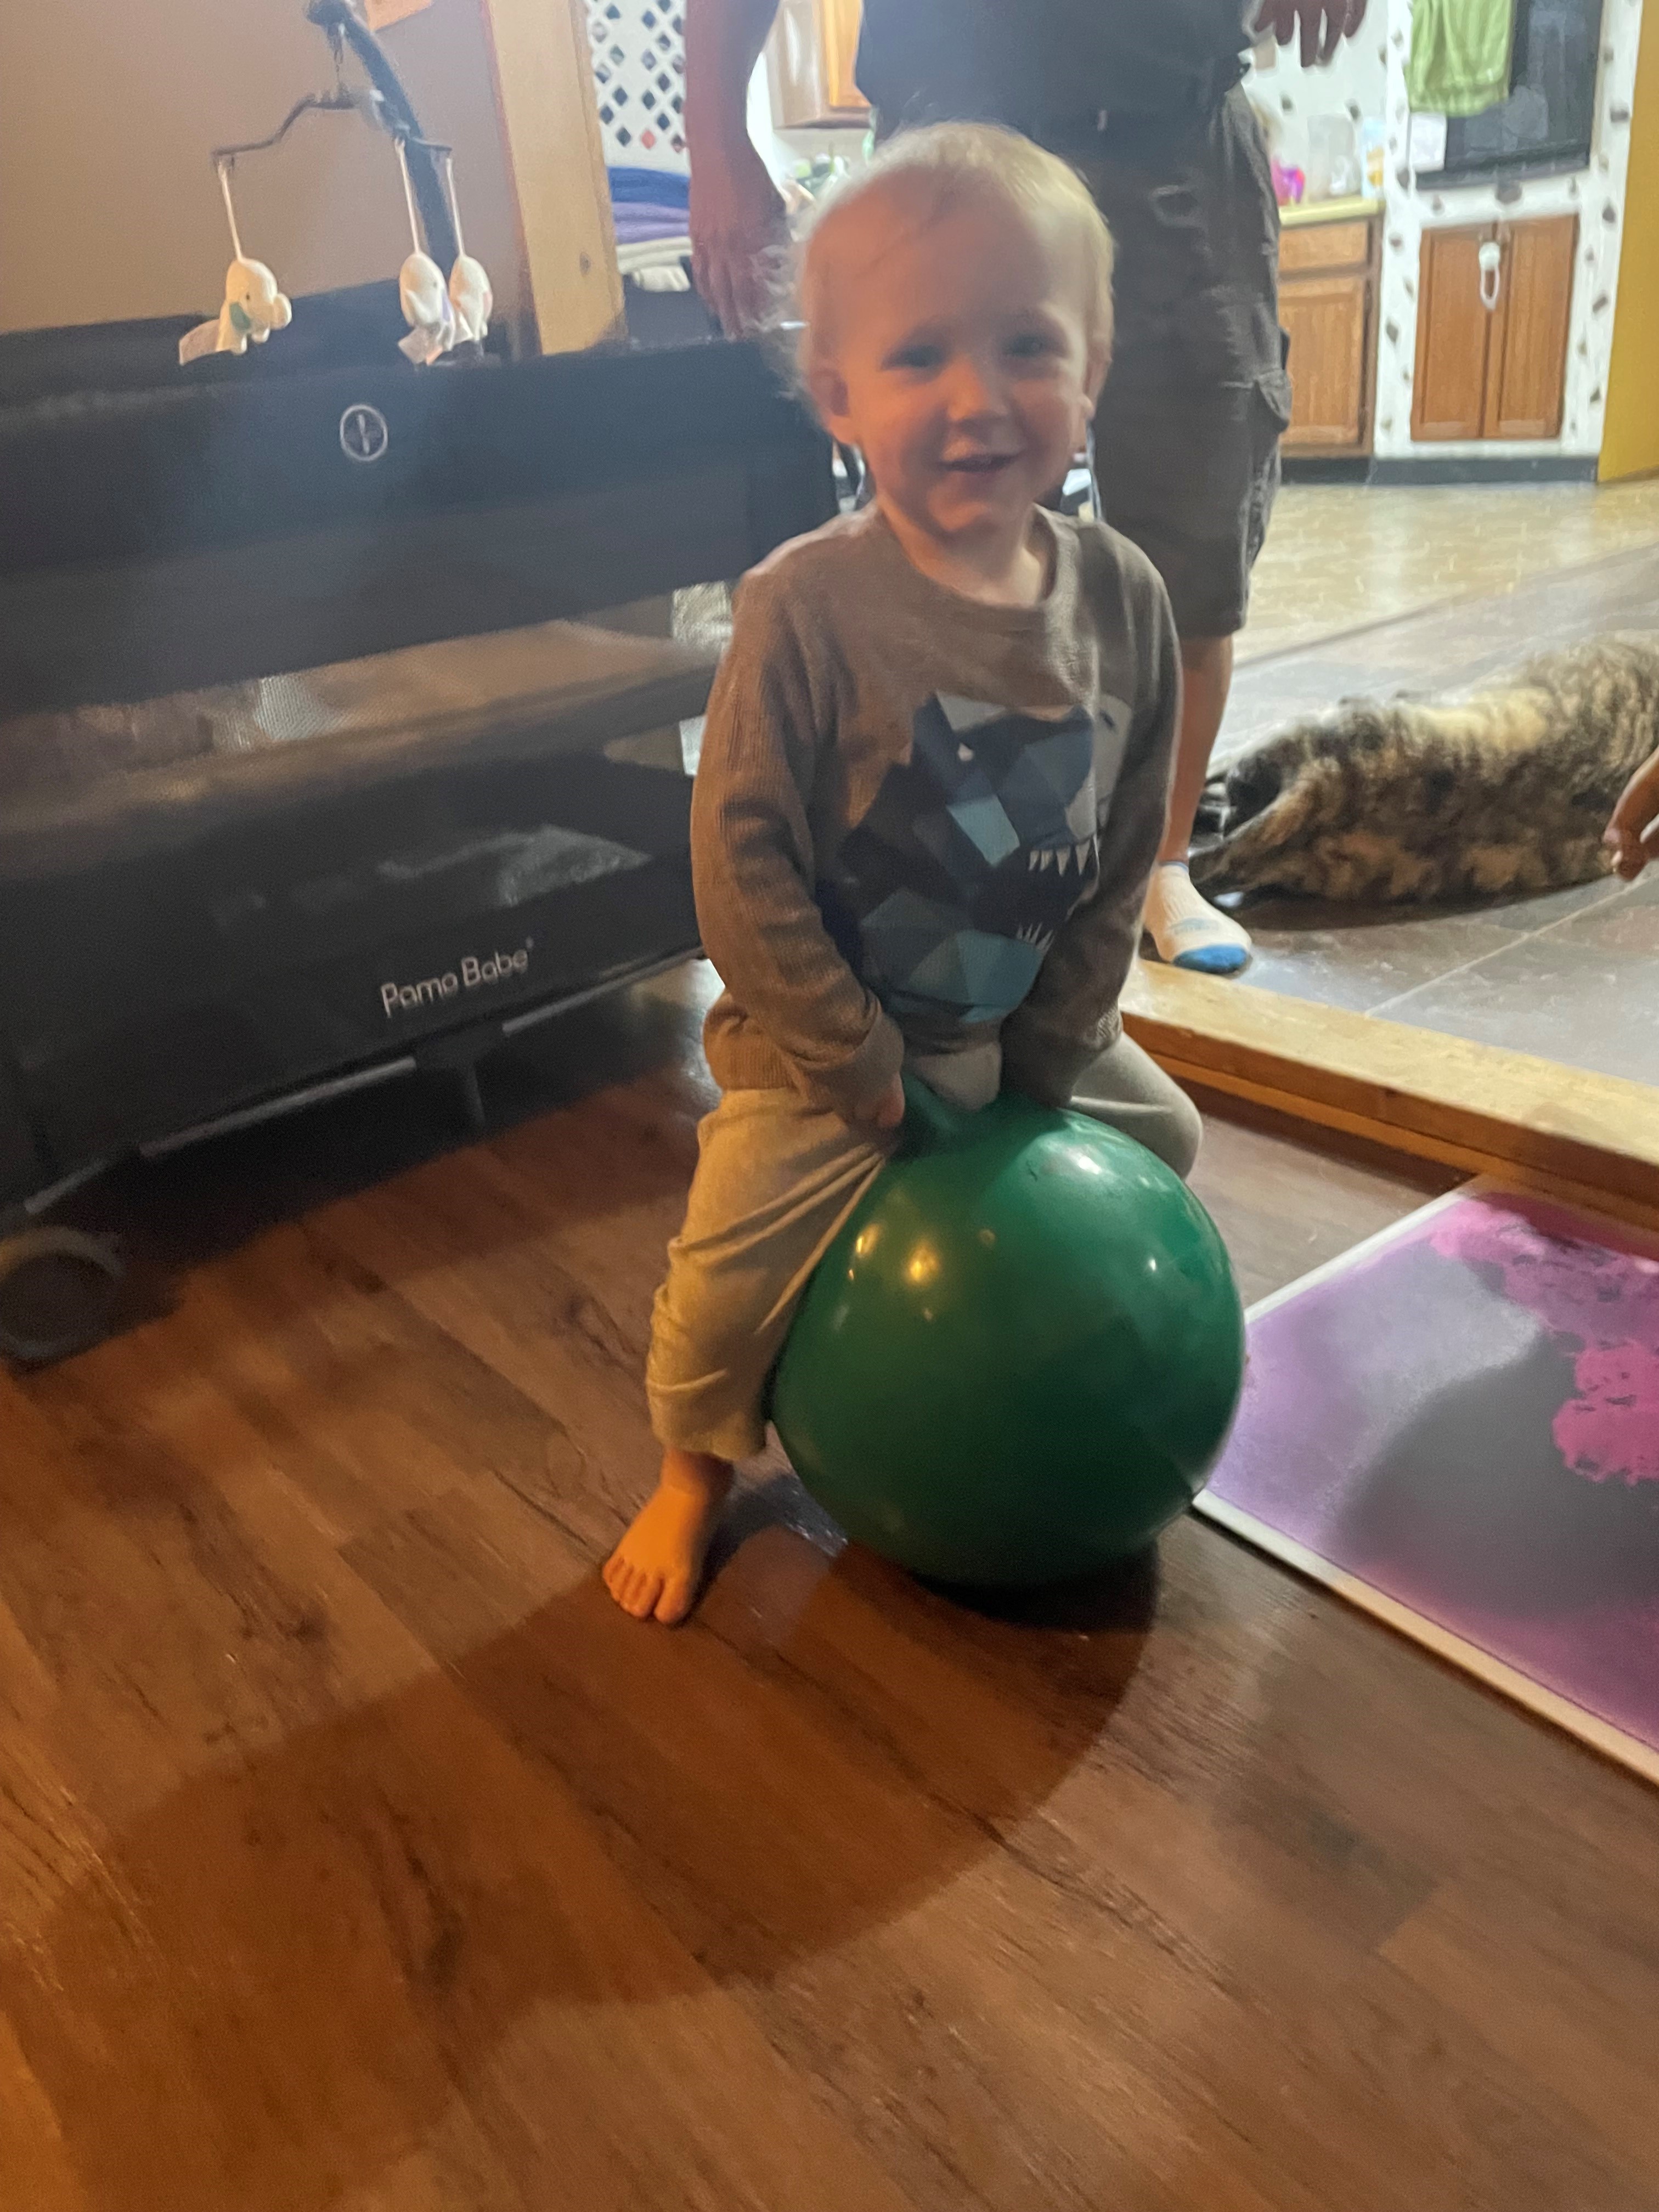 Toddler bouncing on a ball